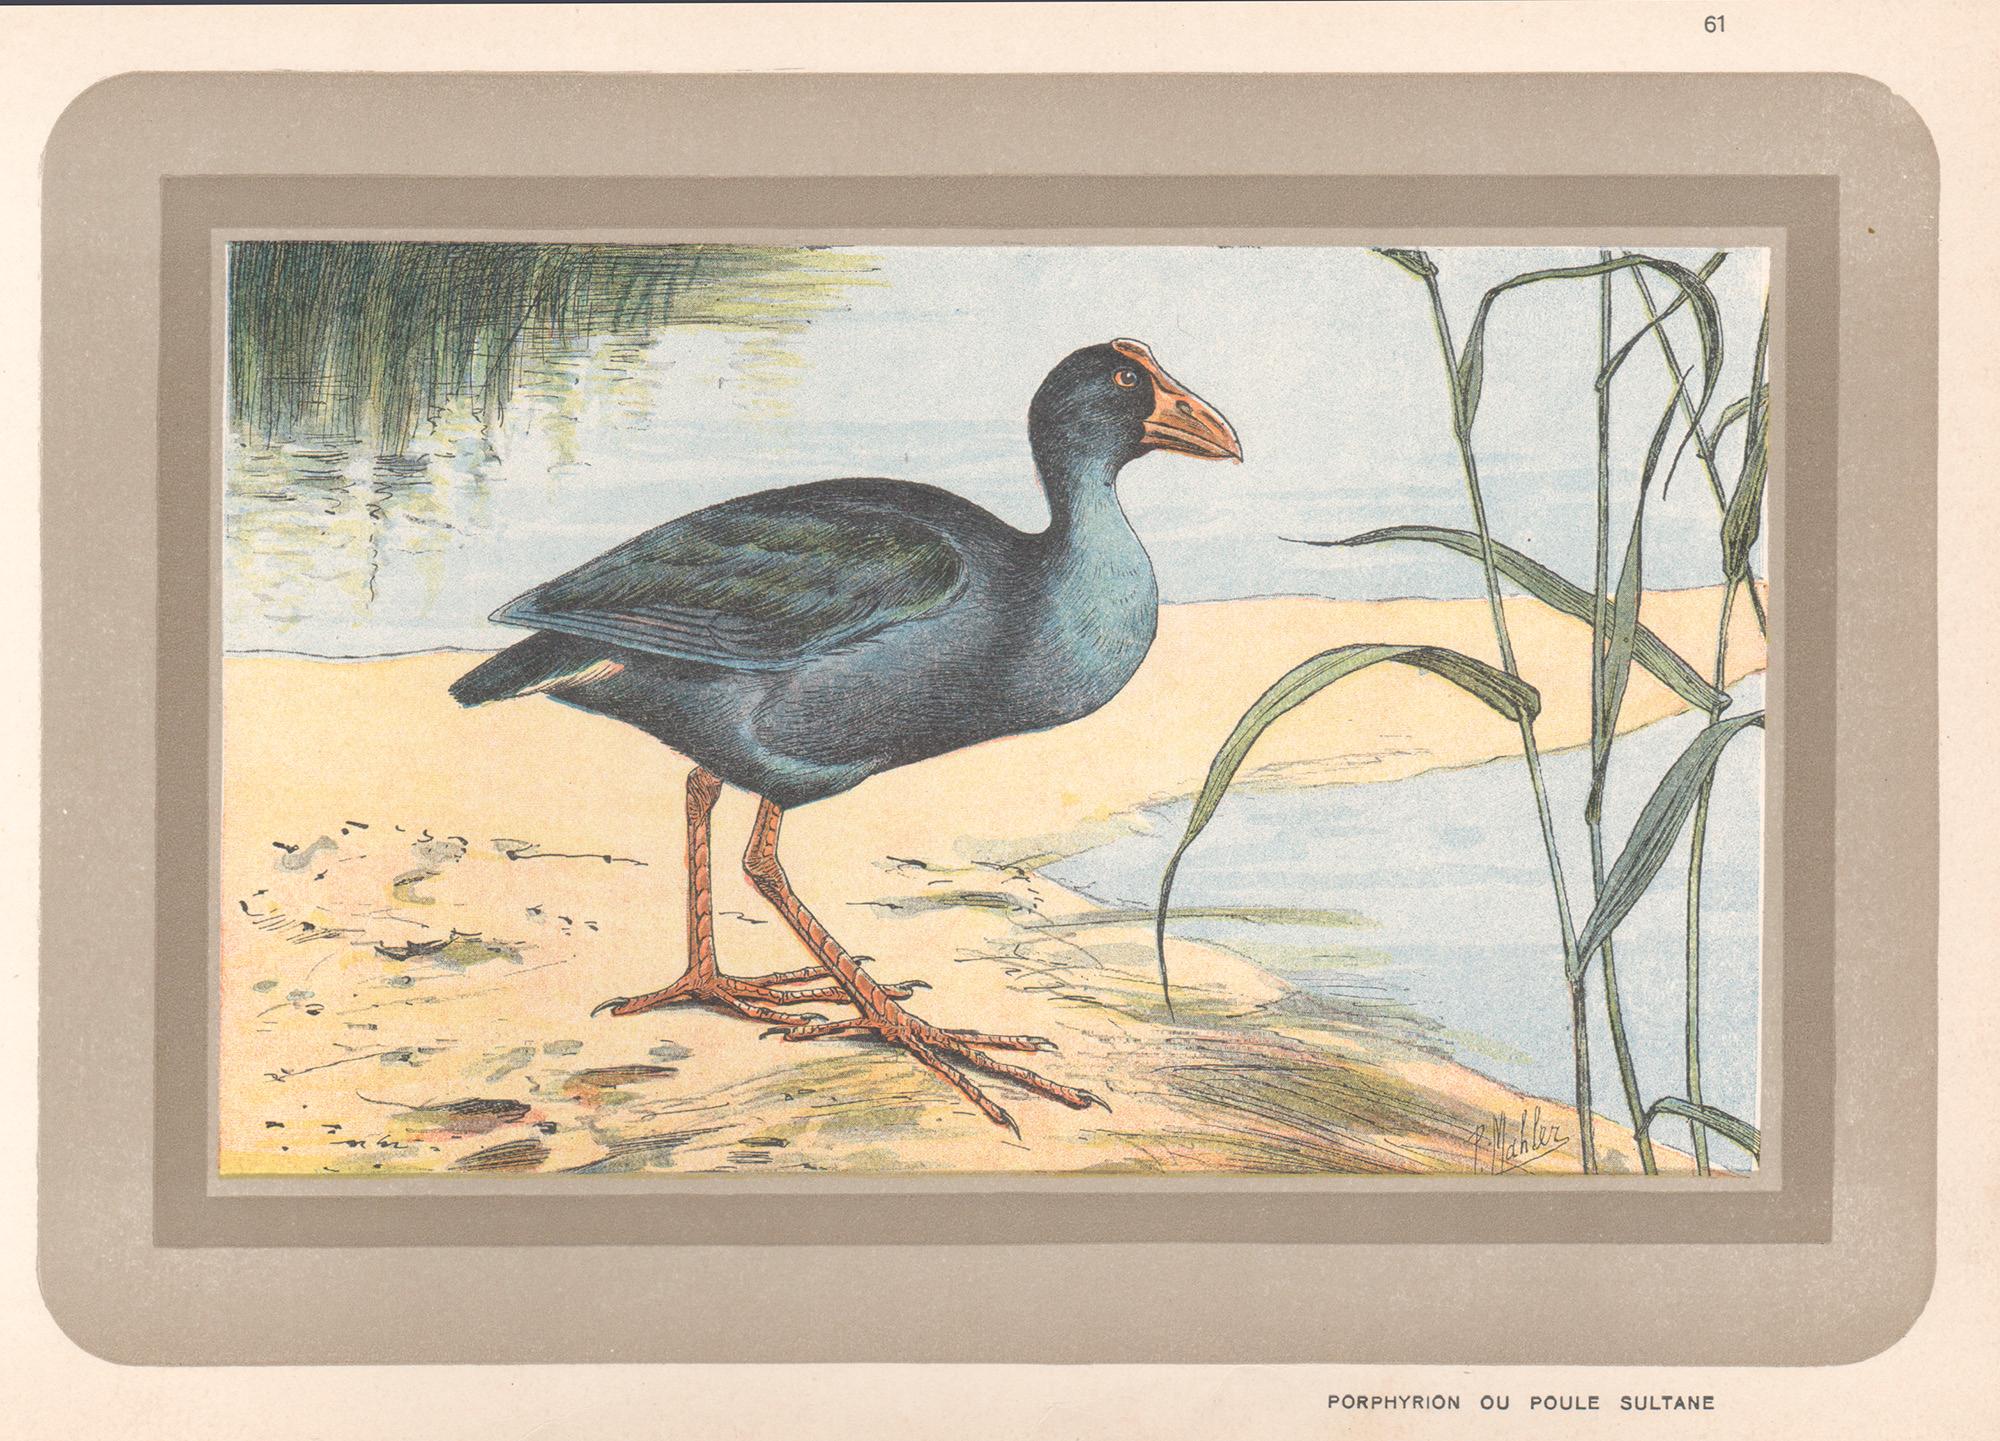 Western Swamphen, French antique natural history water bird art print